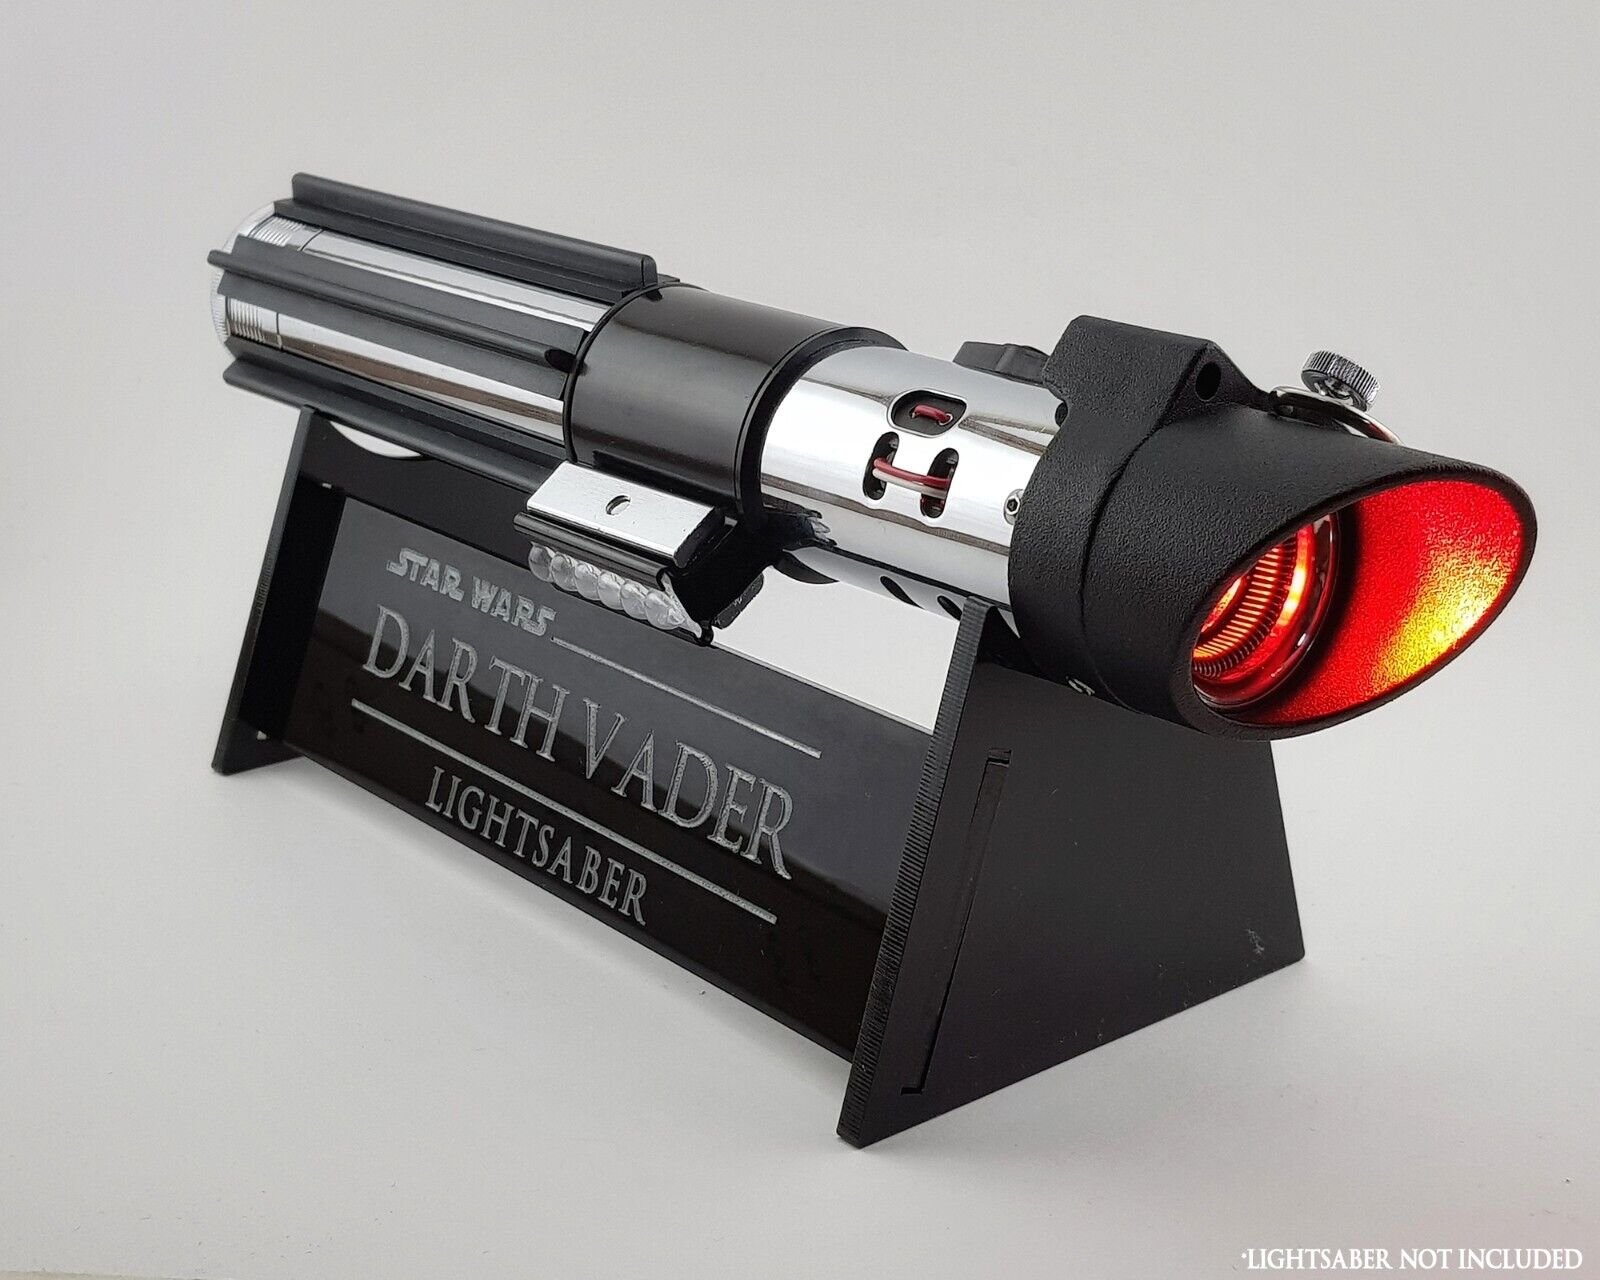 Classic Piano Black Acrylic Lightsaber Stand with Customizable Engraved Text